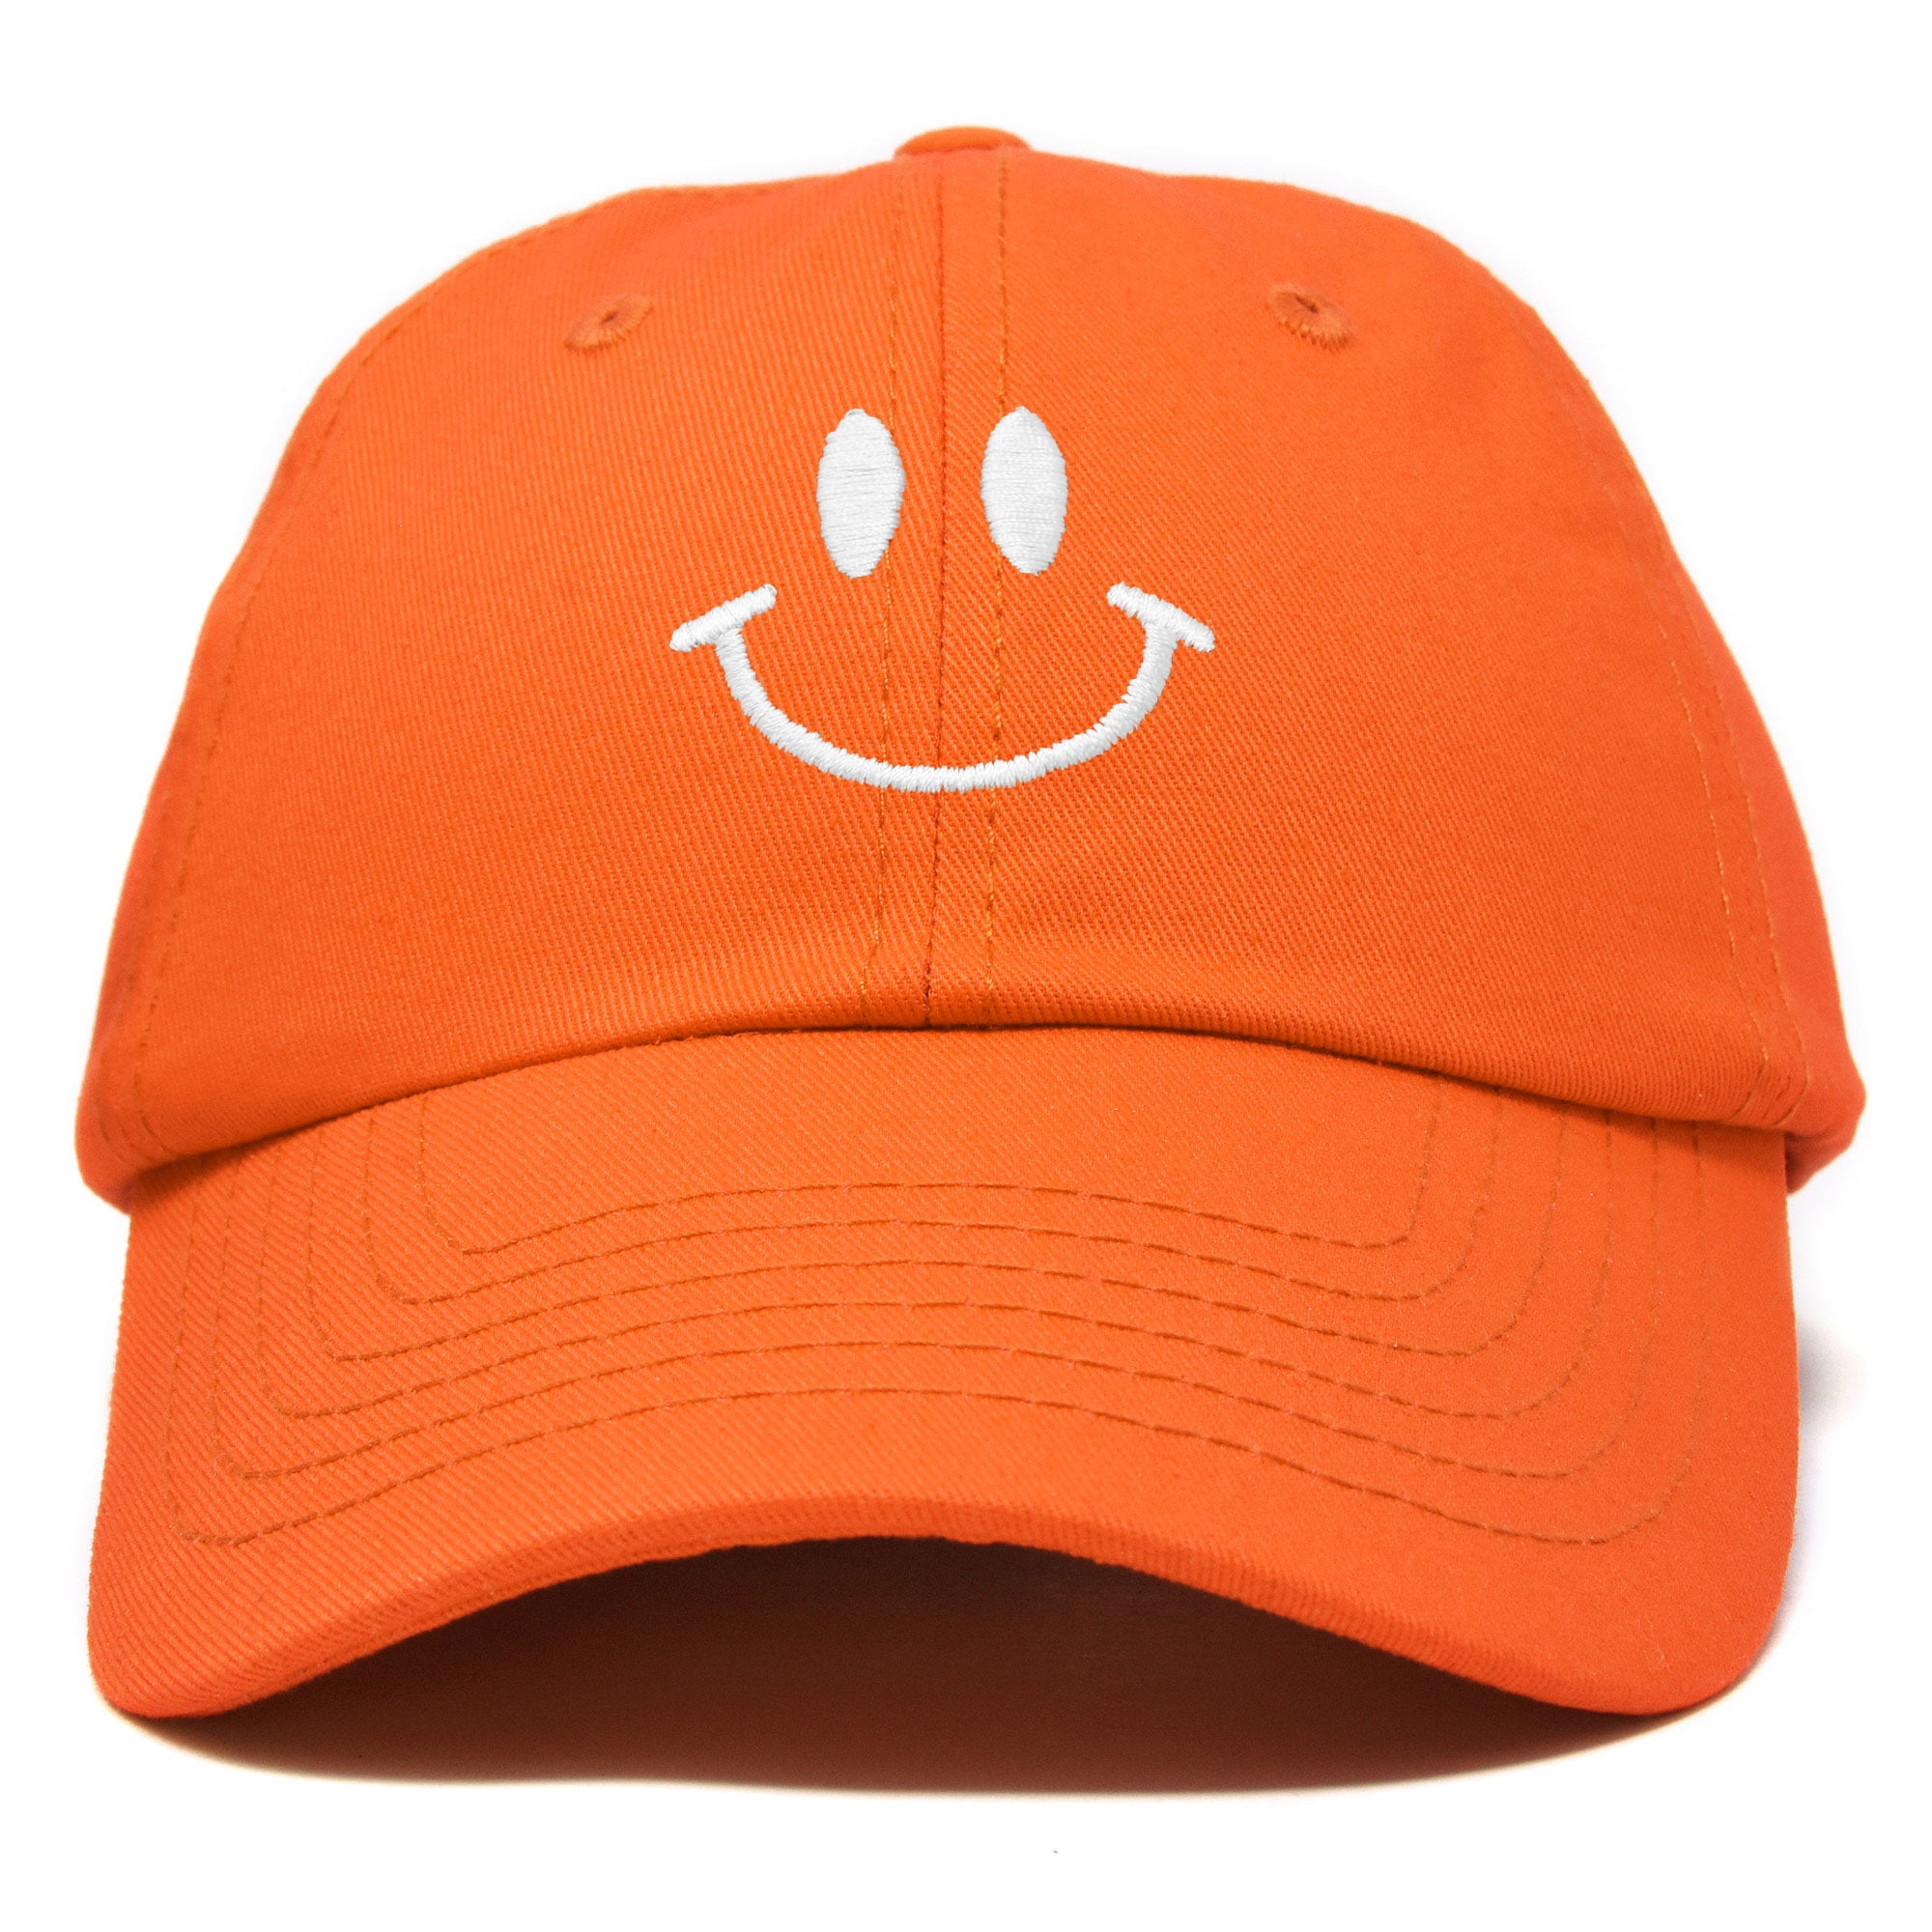 Baseball Cap Embroidered Smiley Face Hat Embroidered Happy Face Summer Hat Men Cute Trendy Hats. HAPPY FACE Hat Dad Hat Embroidered